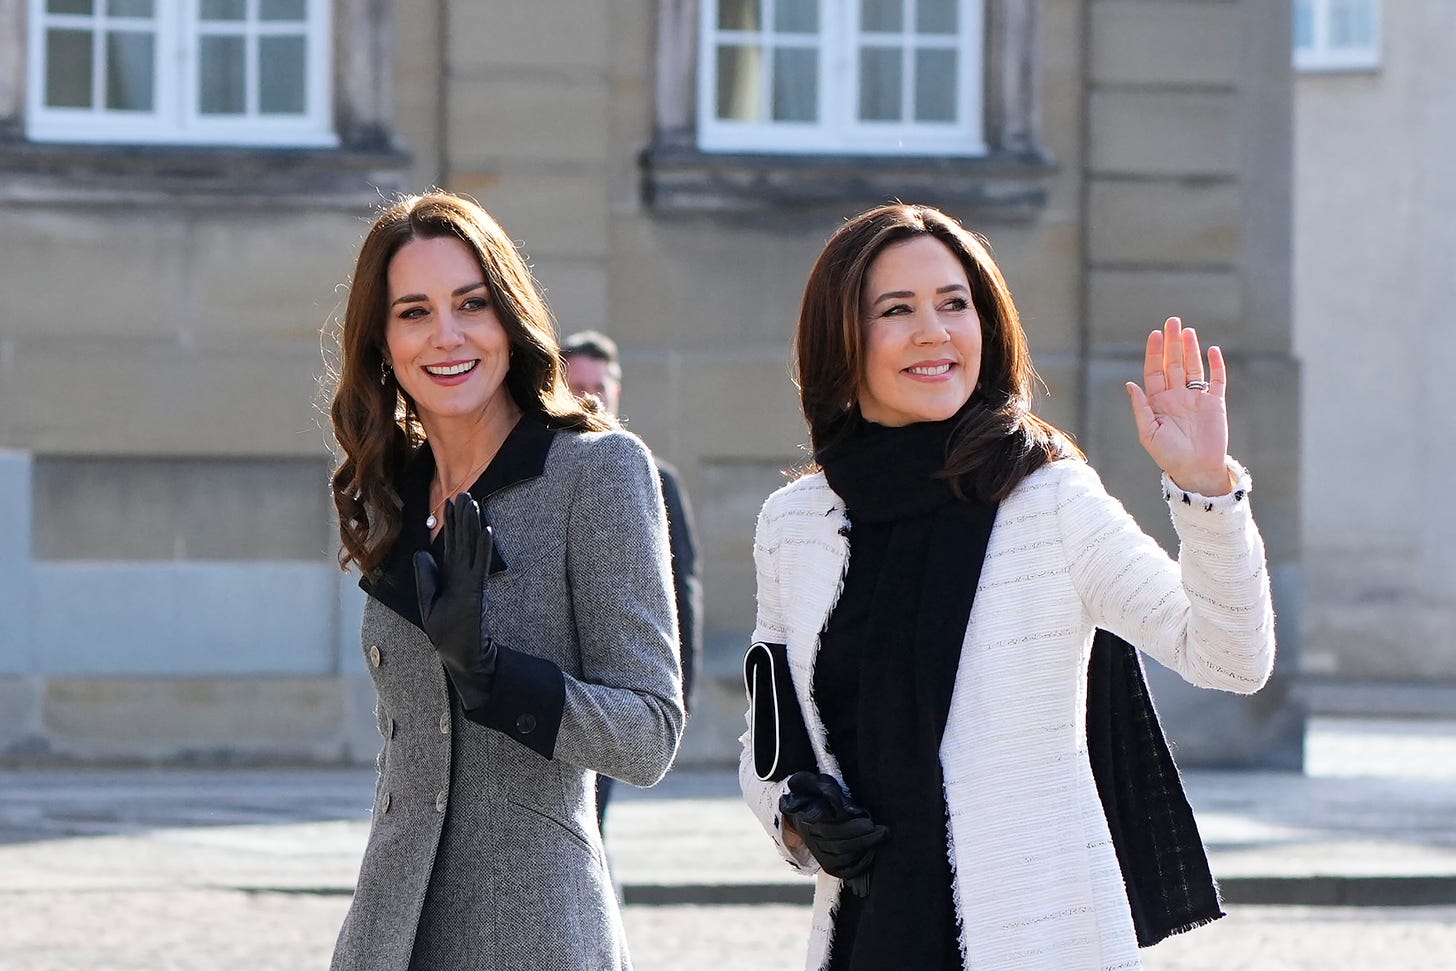 kate middleton and princess mary of denmark wave to cameras